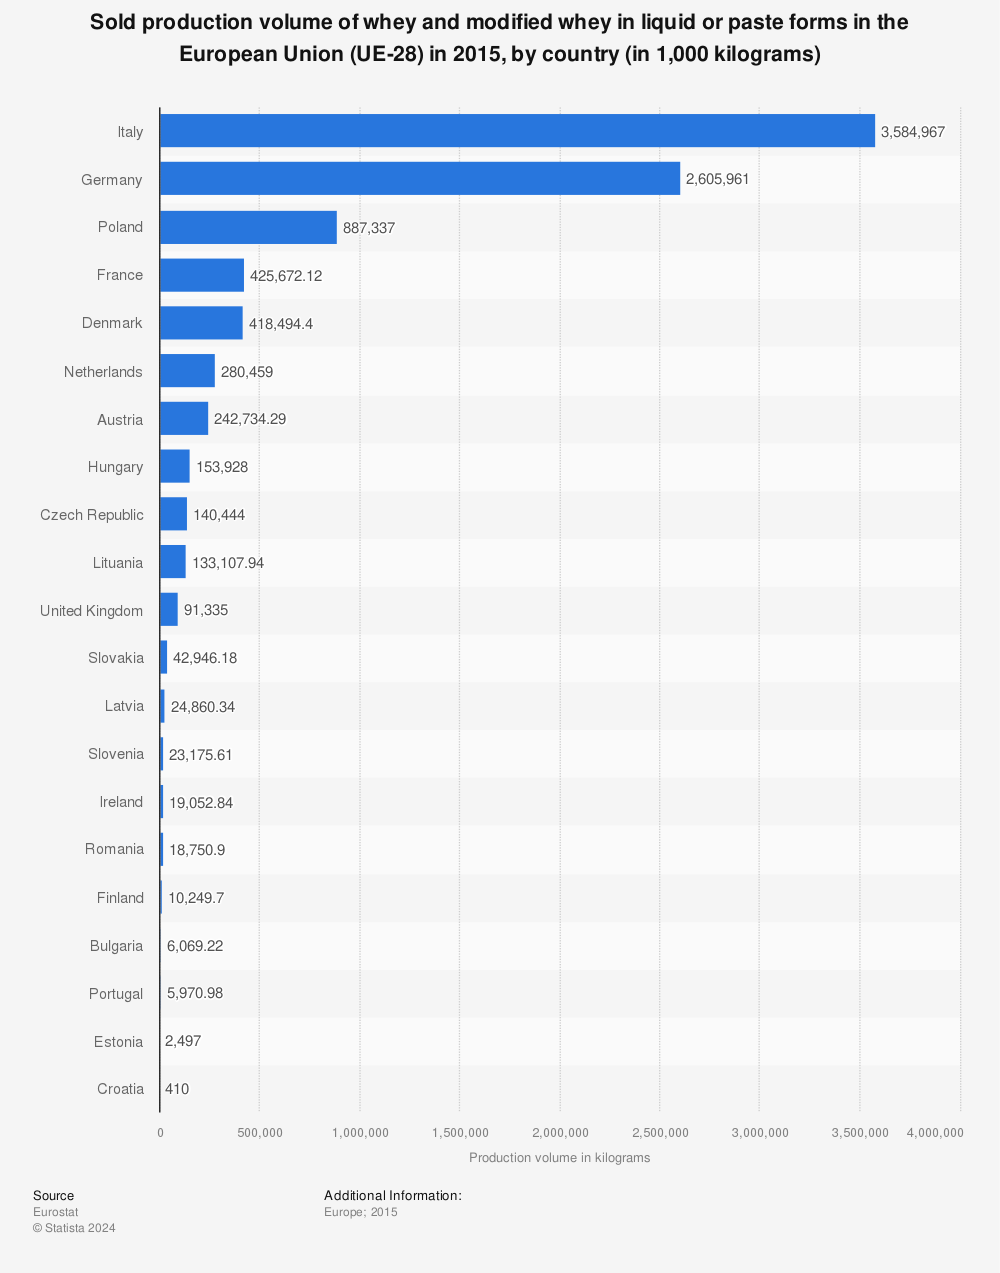 Statistic: Sold production volume of whey and modified whey in liquid or paste forms in the European Union (UE-28) in 2015, by country (in 1,000 kilograms) | Statista